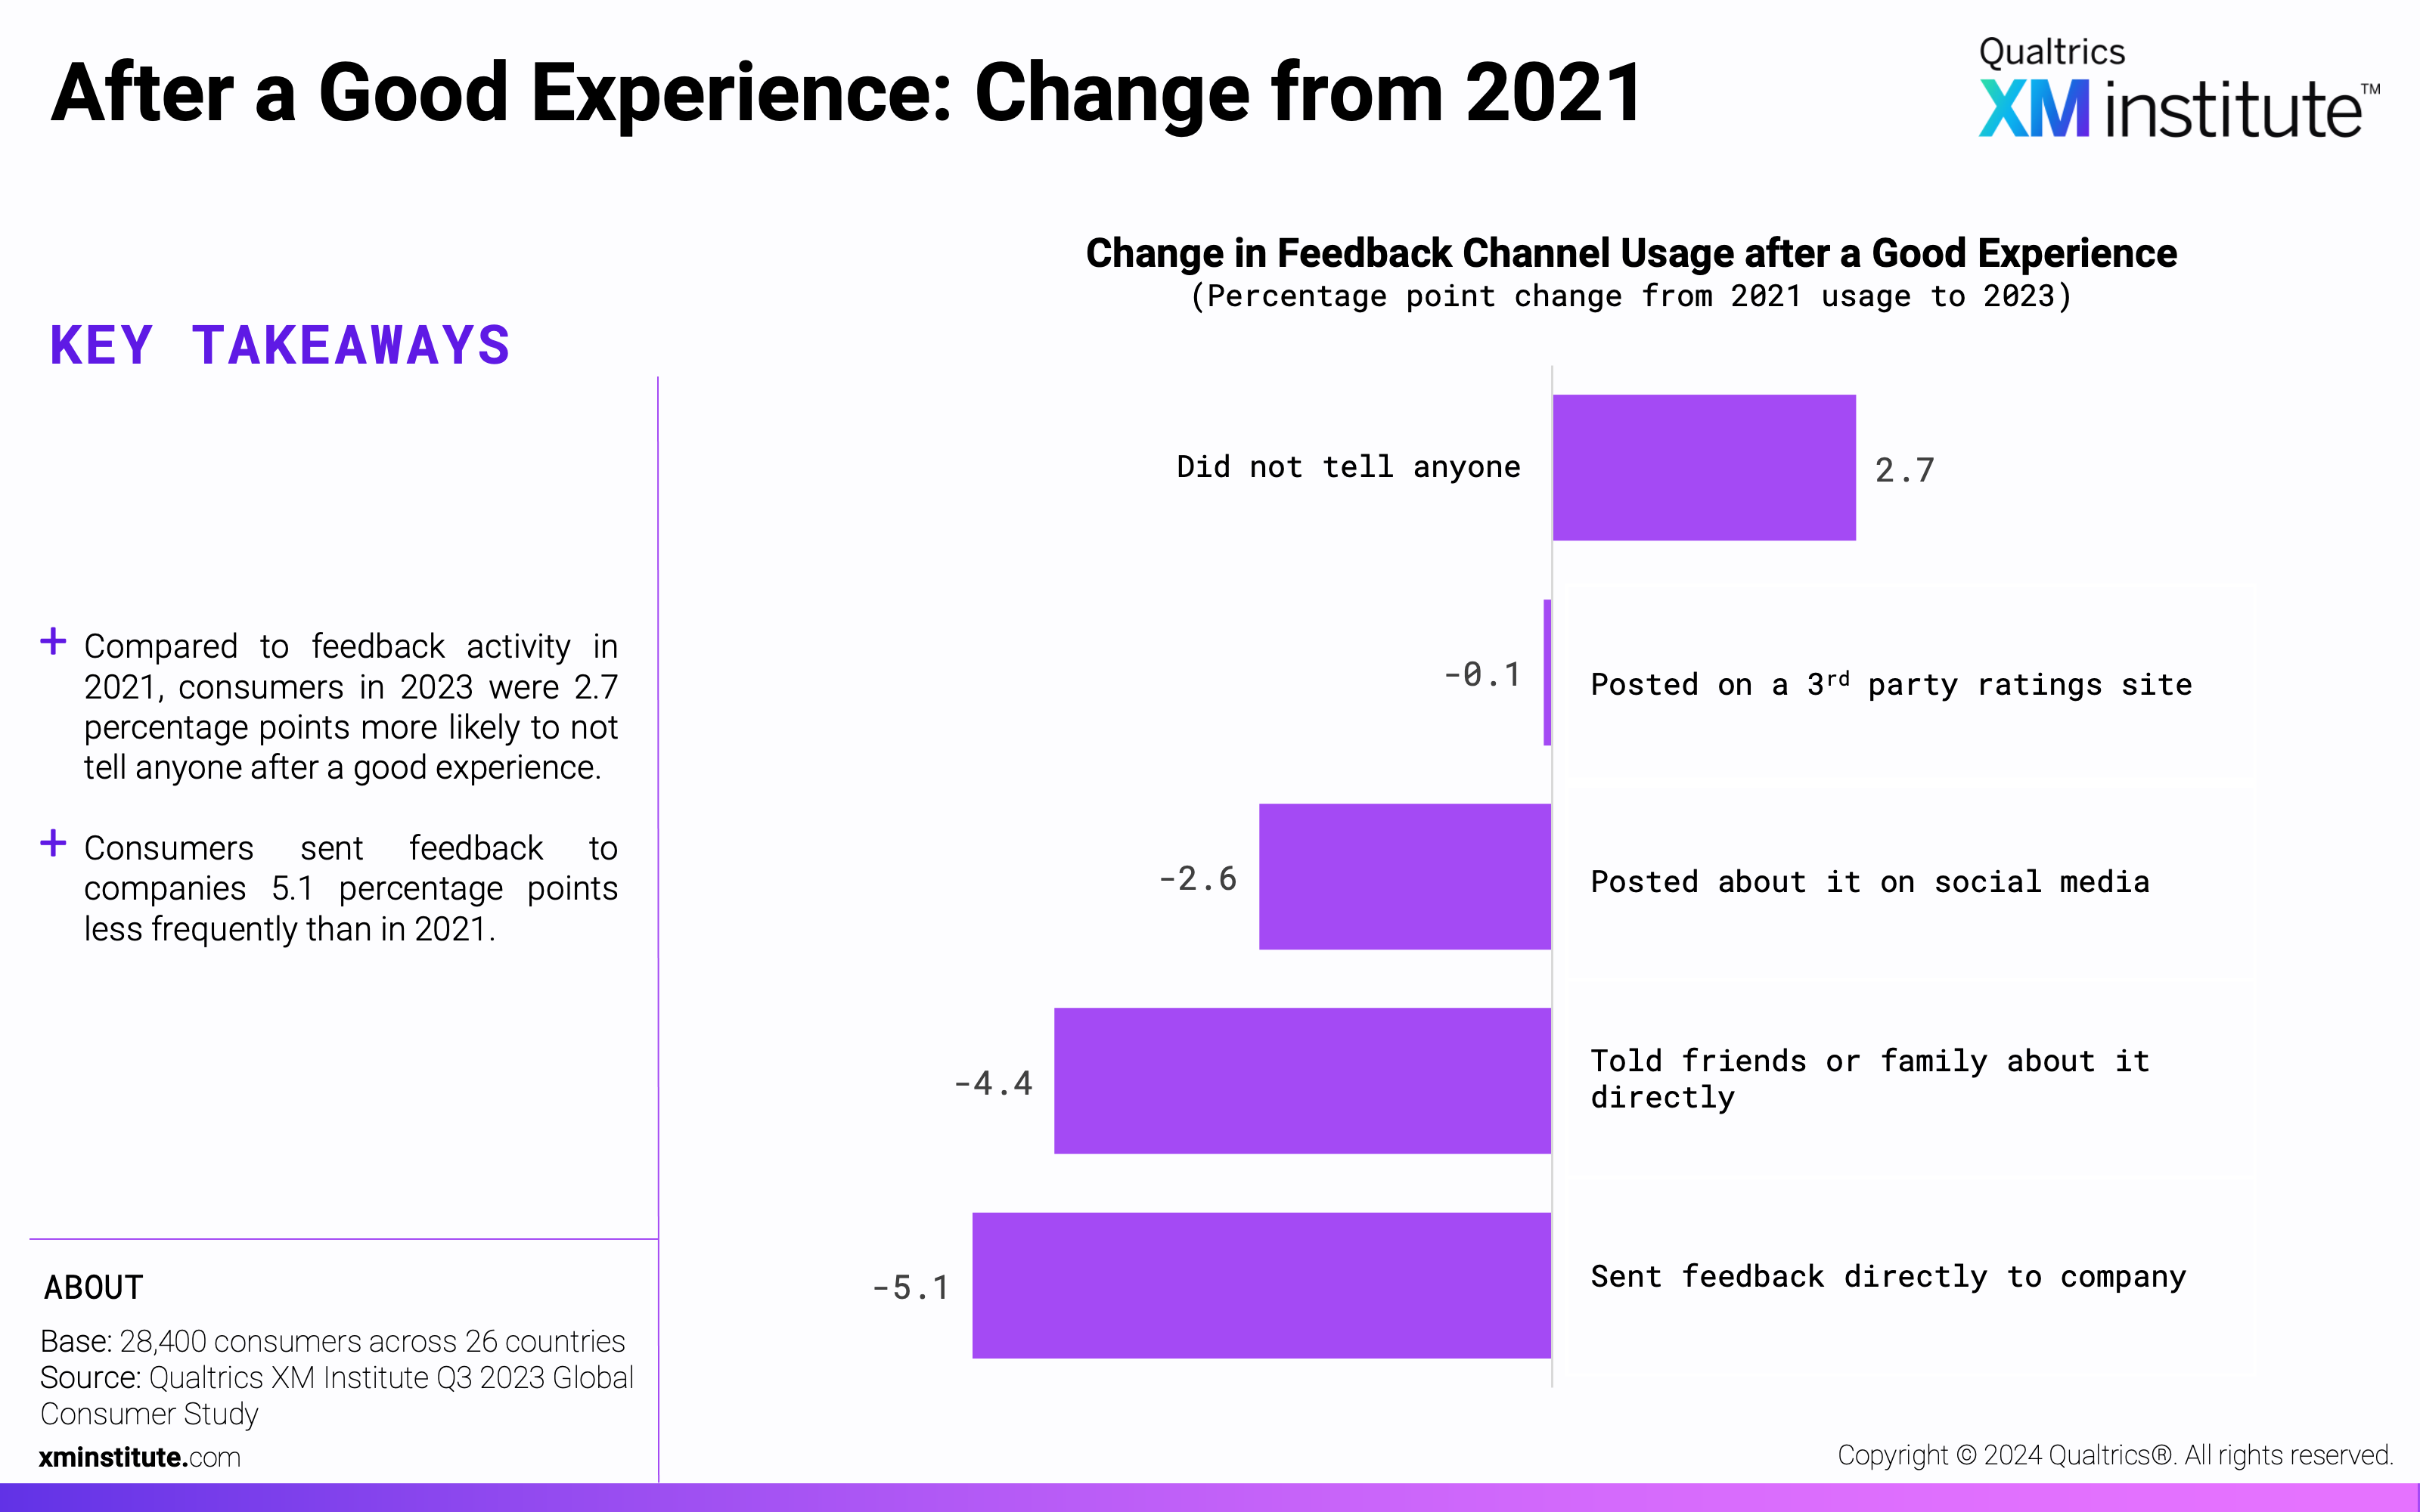 This chart shows the change in consumers' usage of feedback channels after a good experience with a company from 2021 to 2024. 